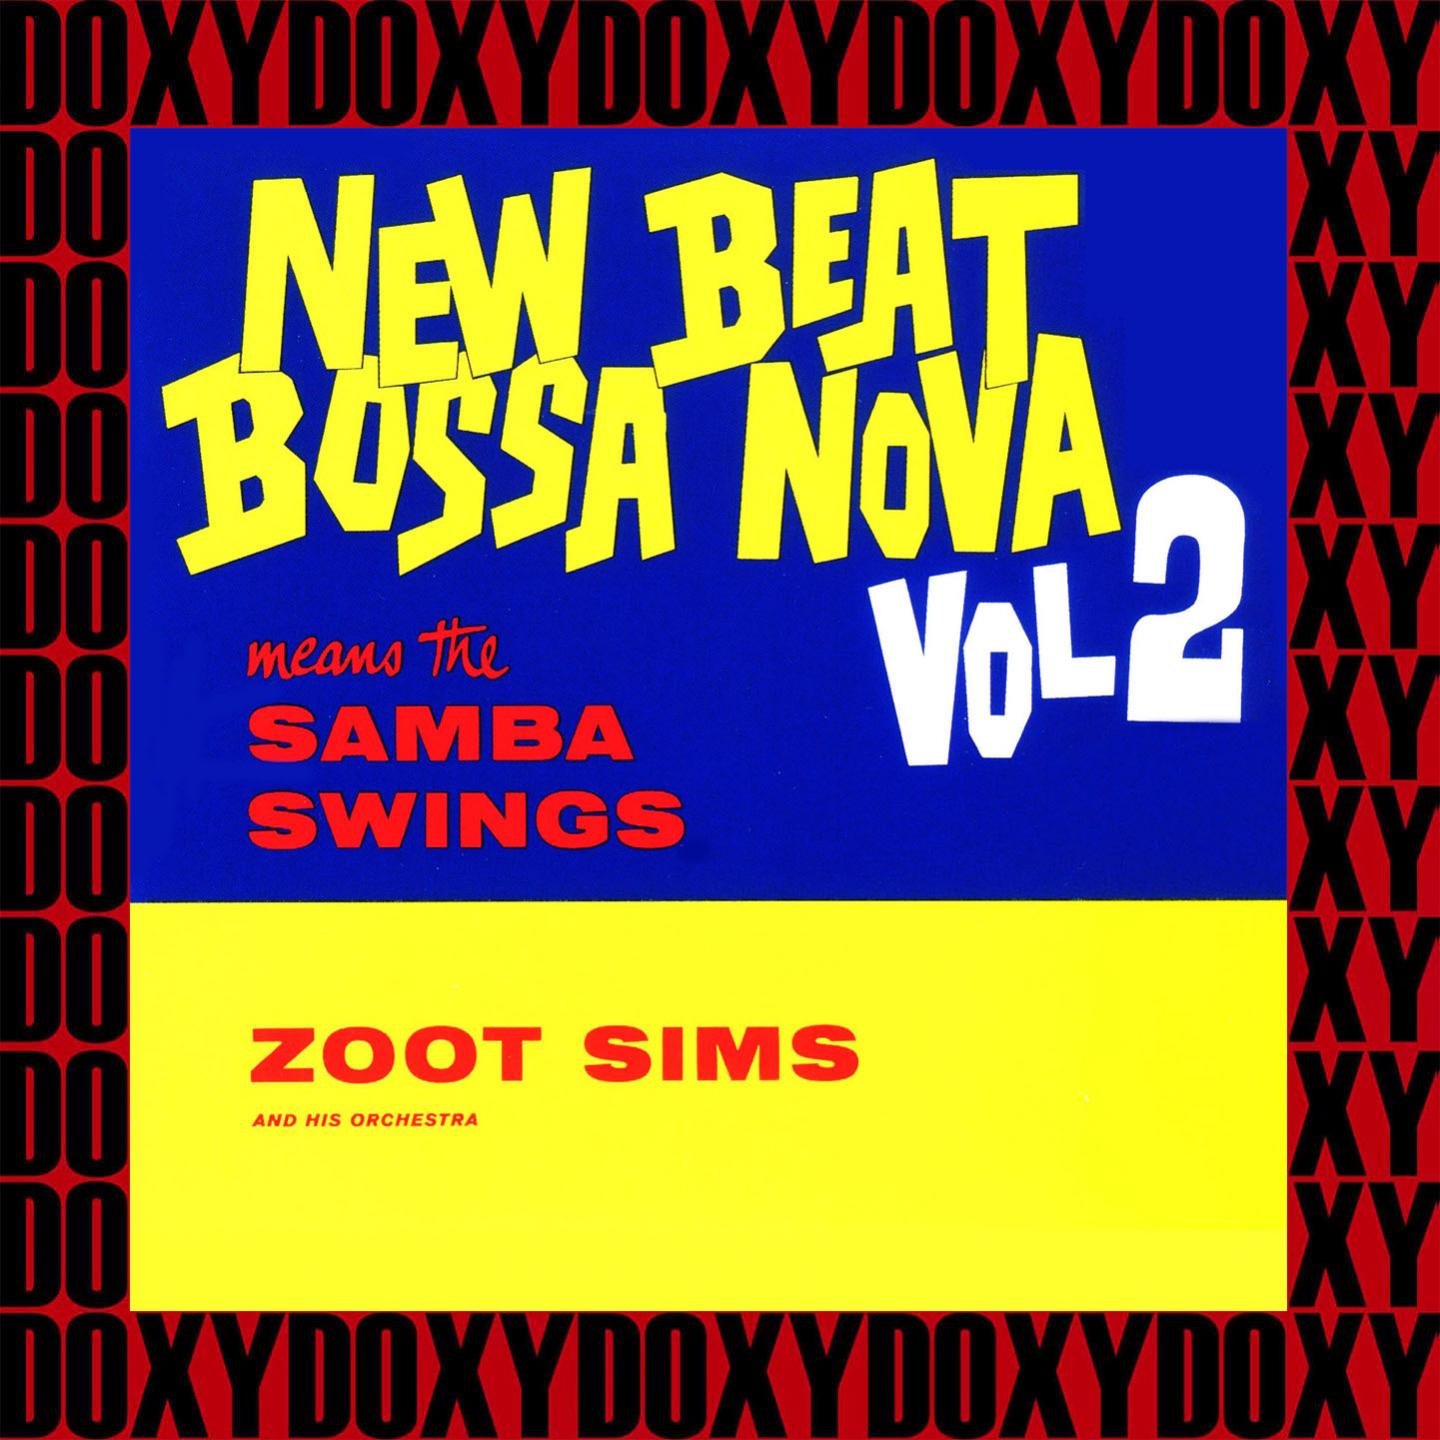 New Beat Bossa Nova Vol.2 (Expanded, Remastered Version) (Doxy Collection)